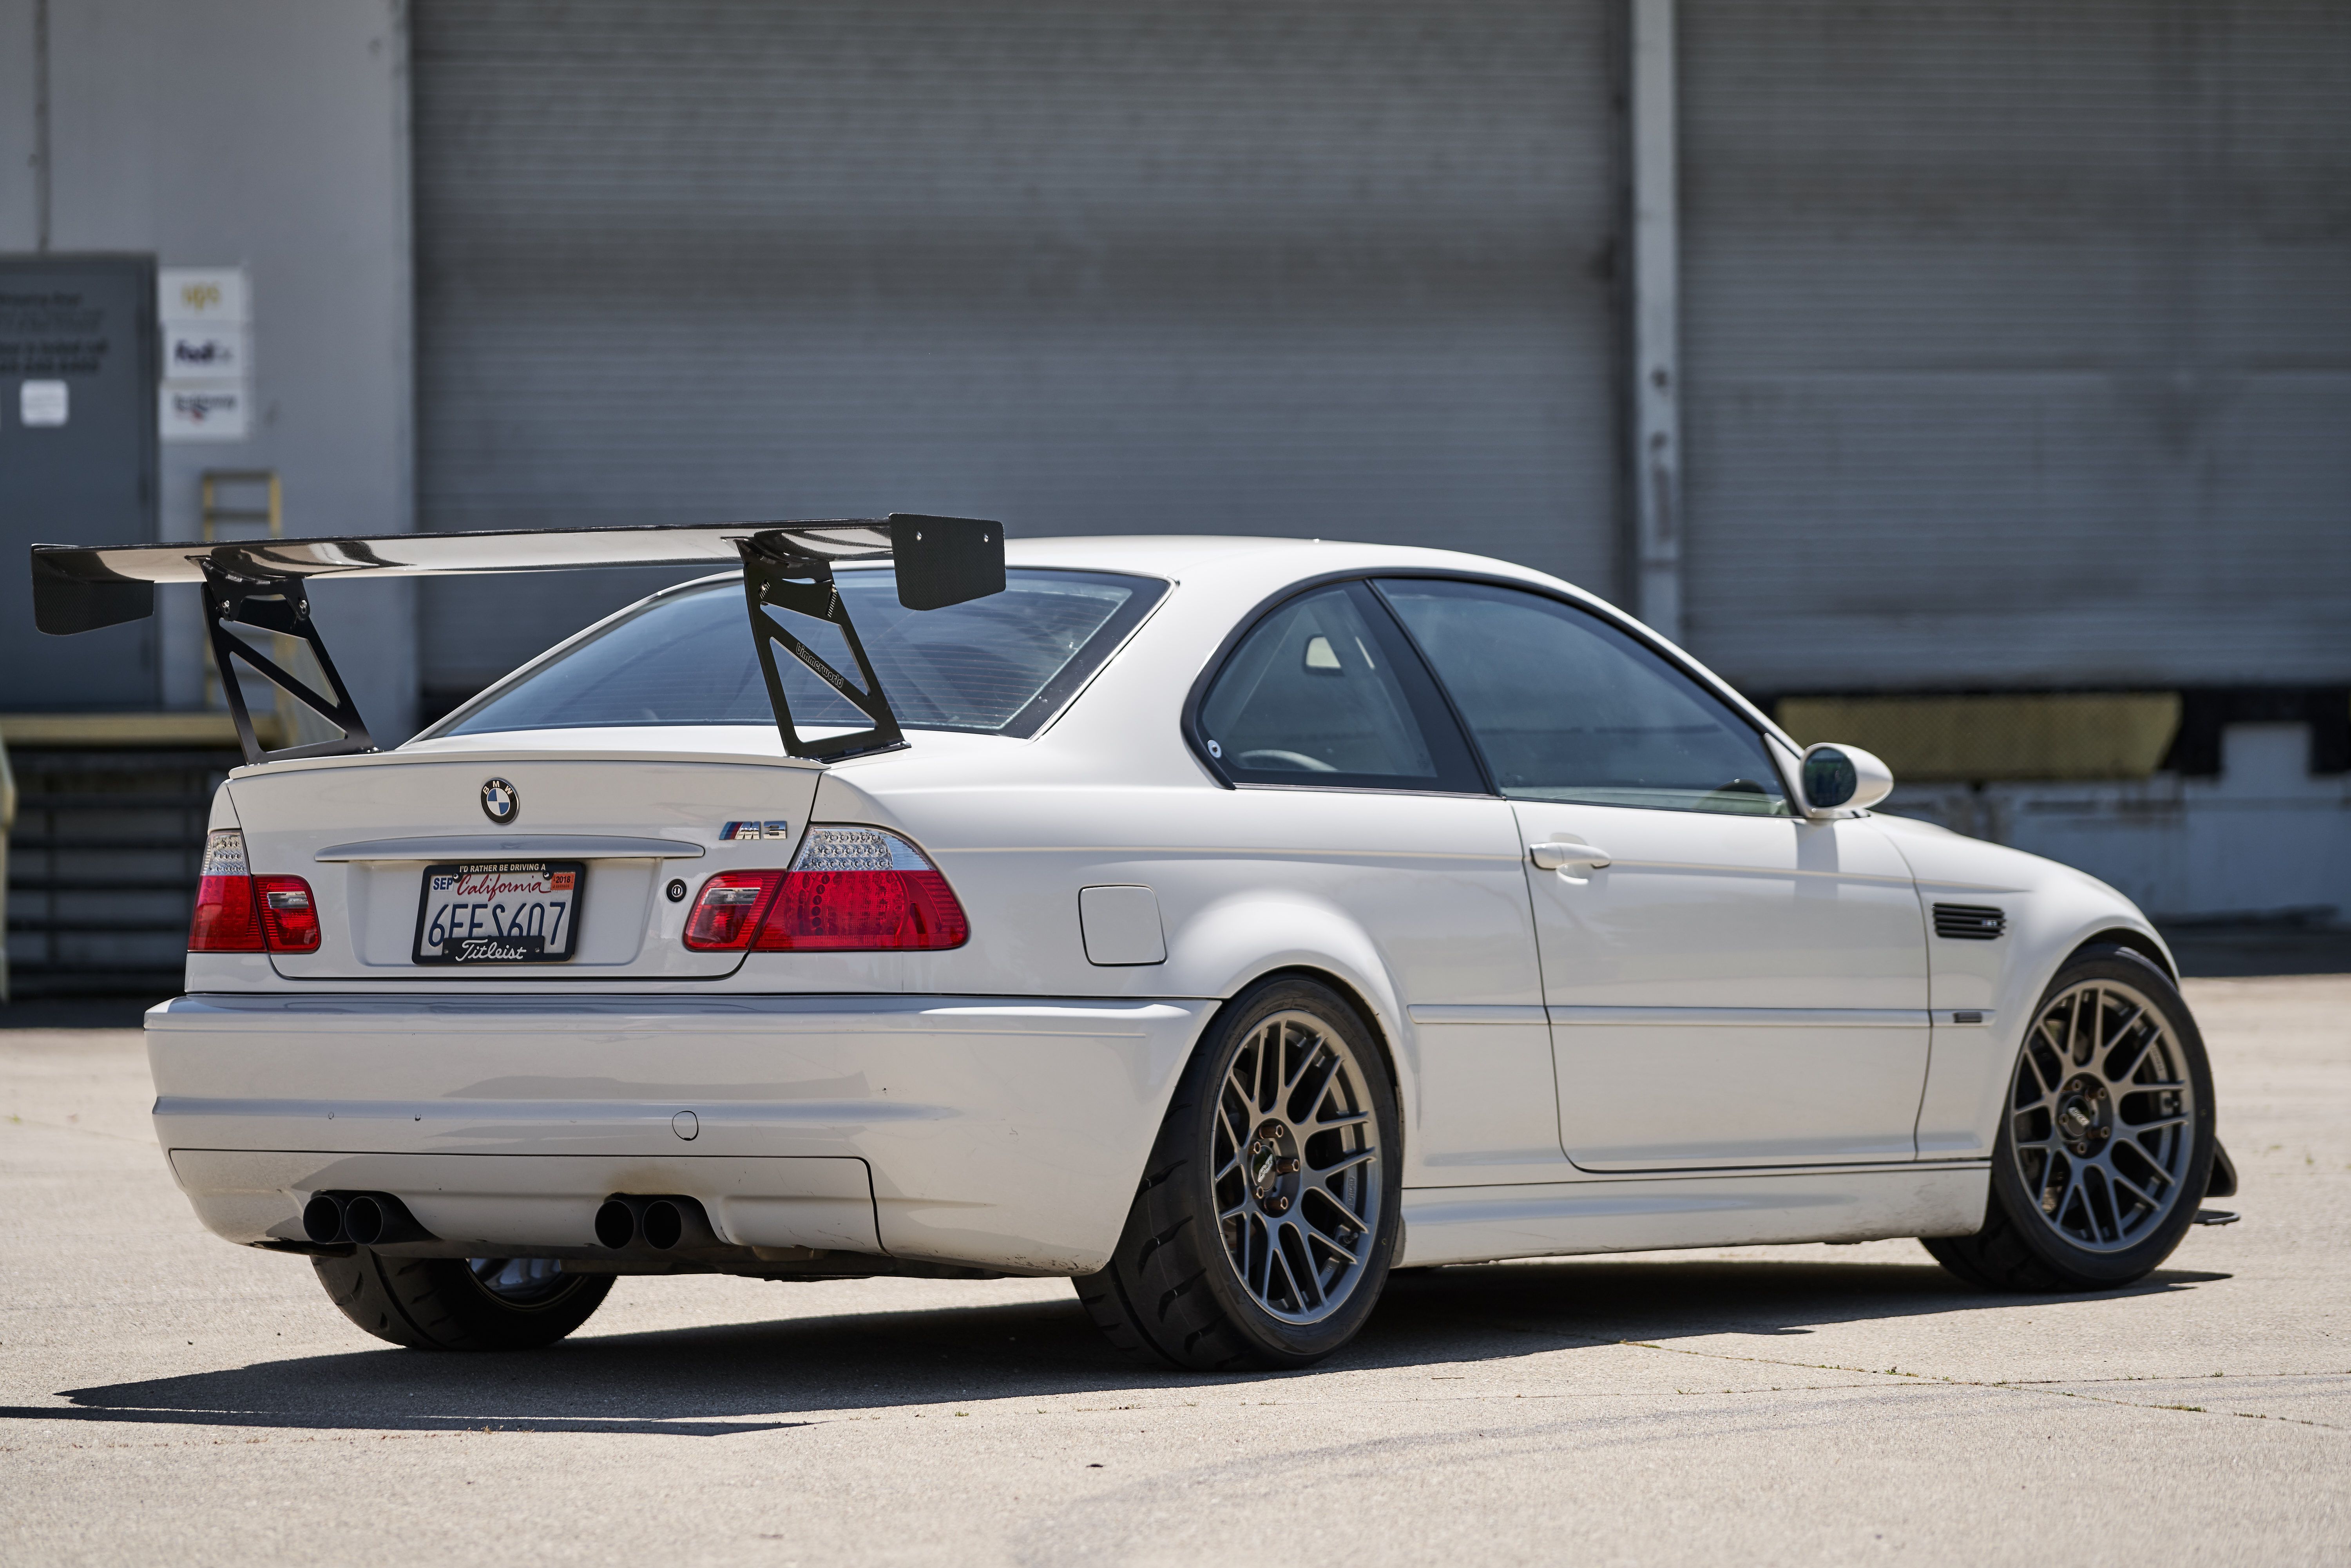 BMW E46 M3 - Other race cars 